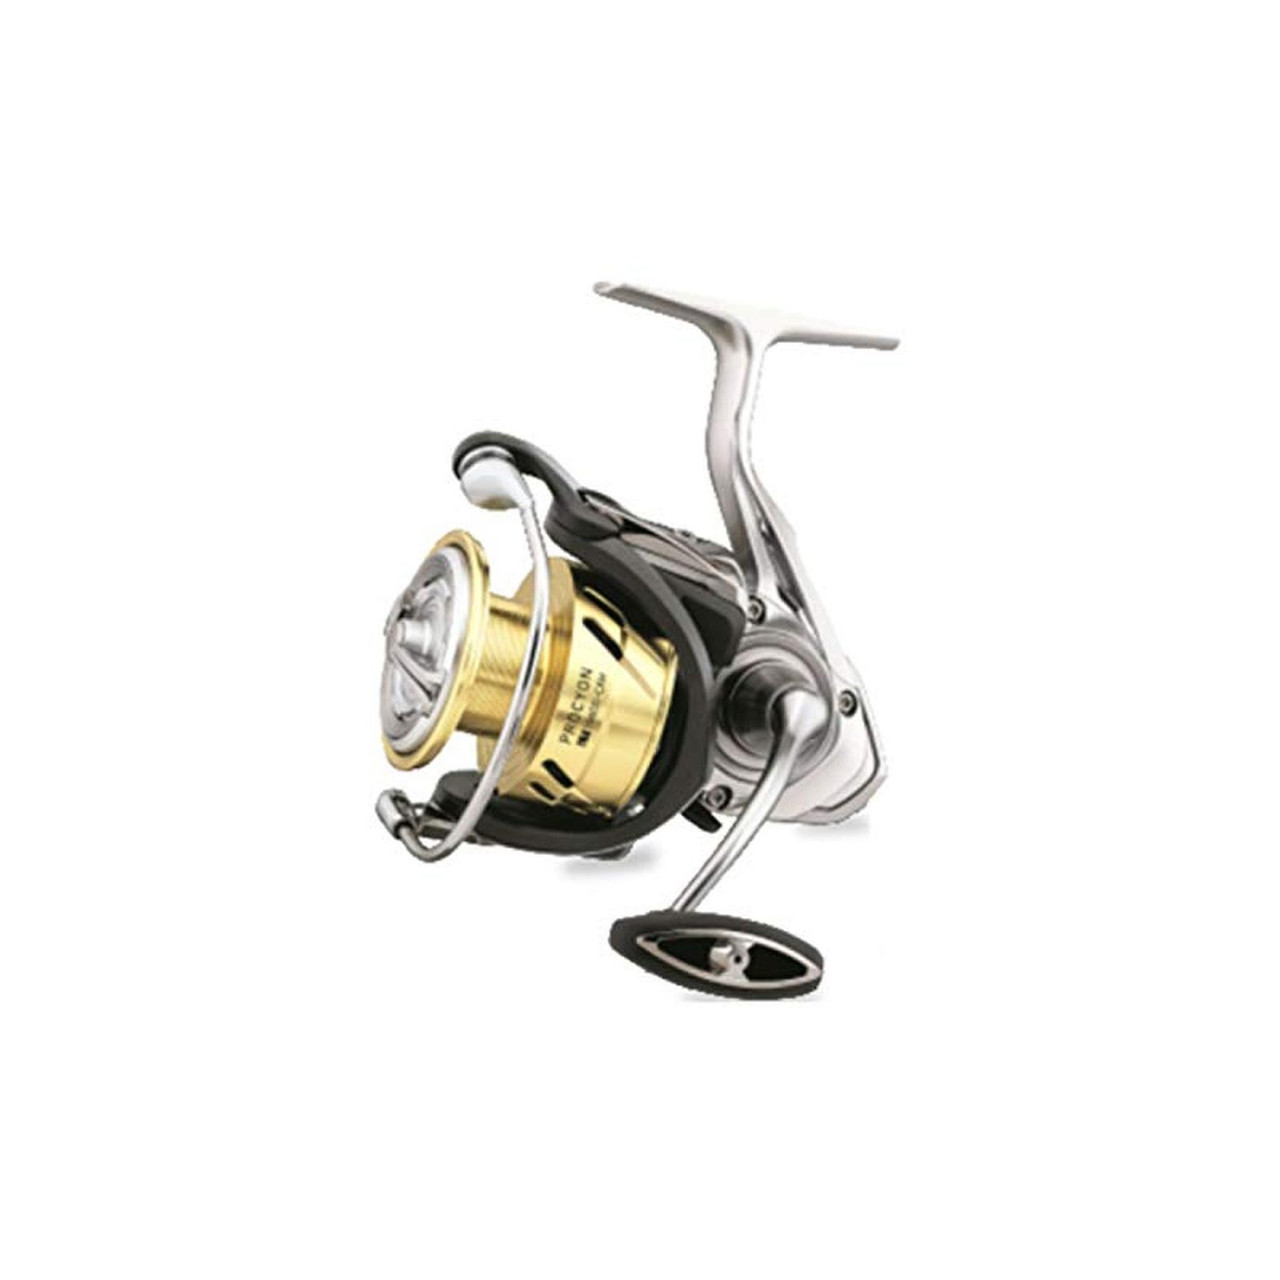 Daiwa Procyon LT Spinning Reels - Fin Feather Fur Outfitters